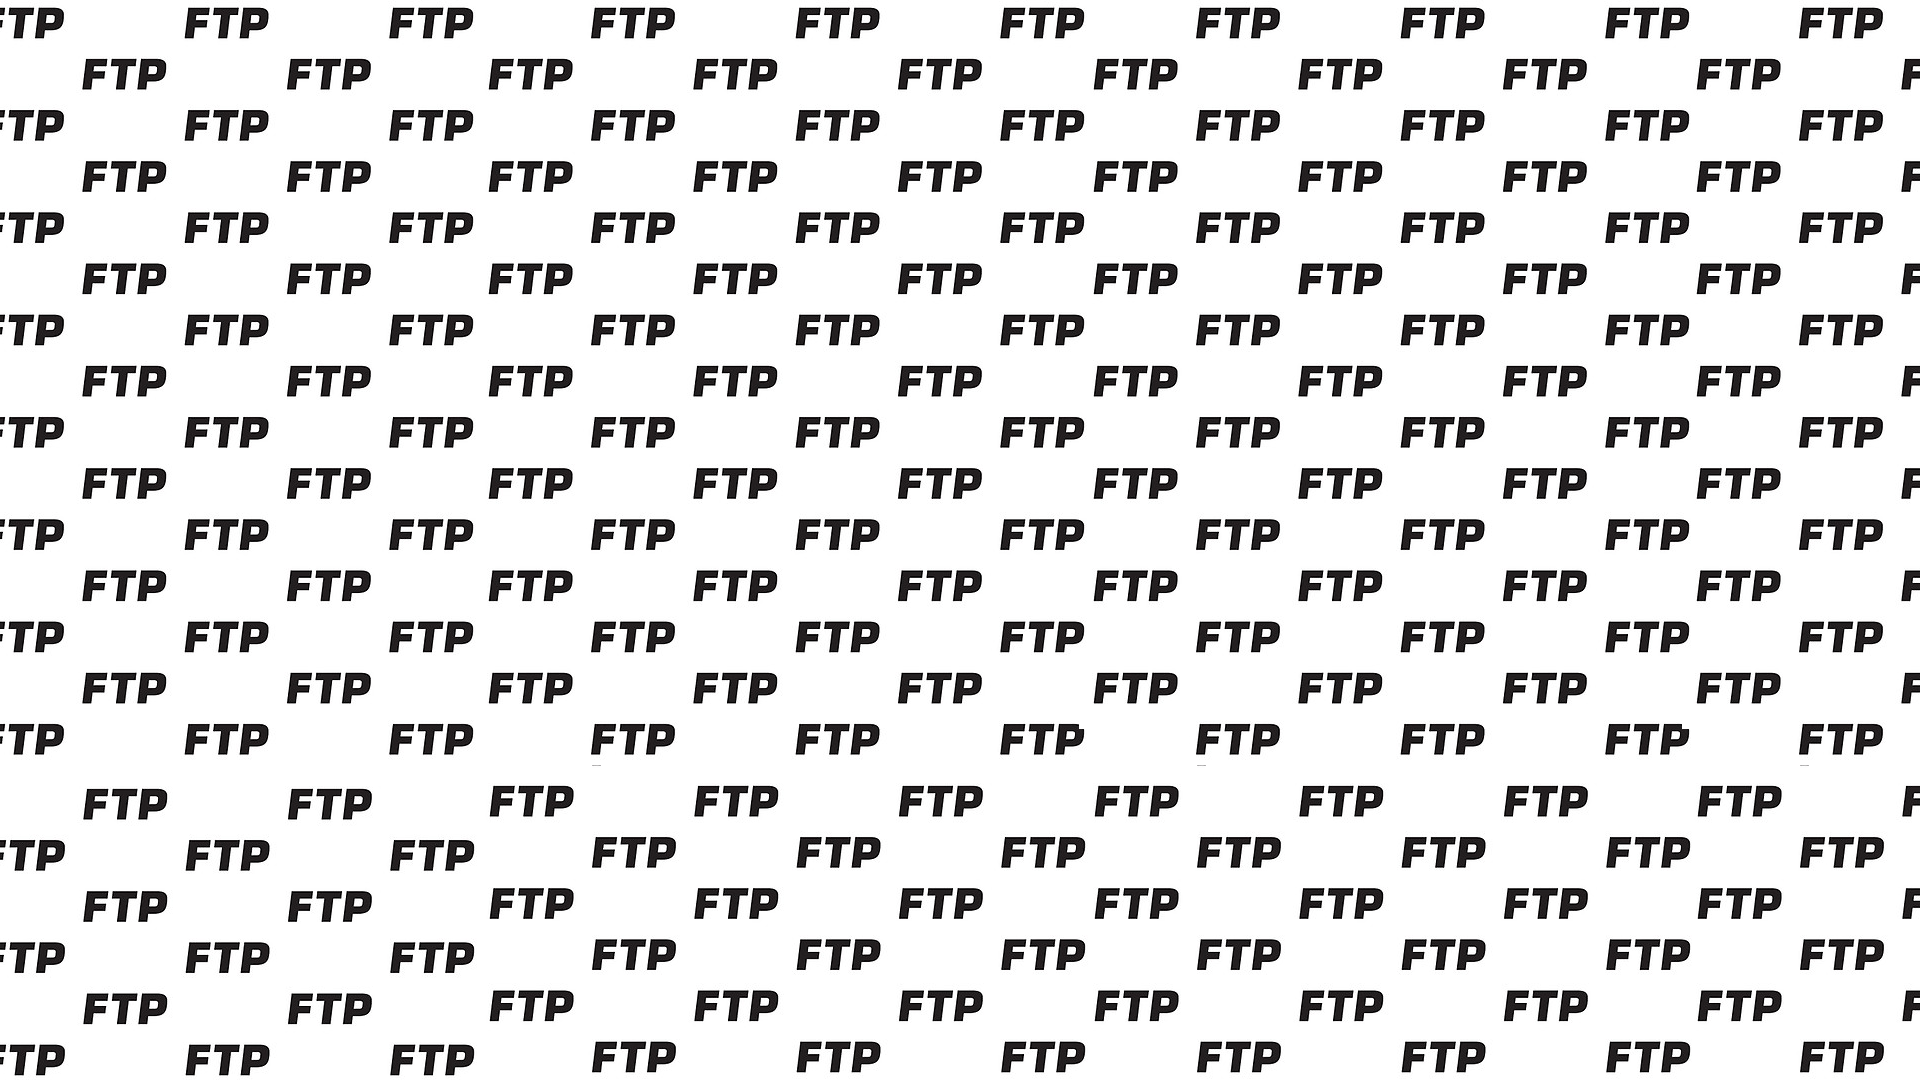 Made some FTP wallpaper for someone, thought I'd post em